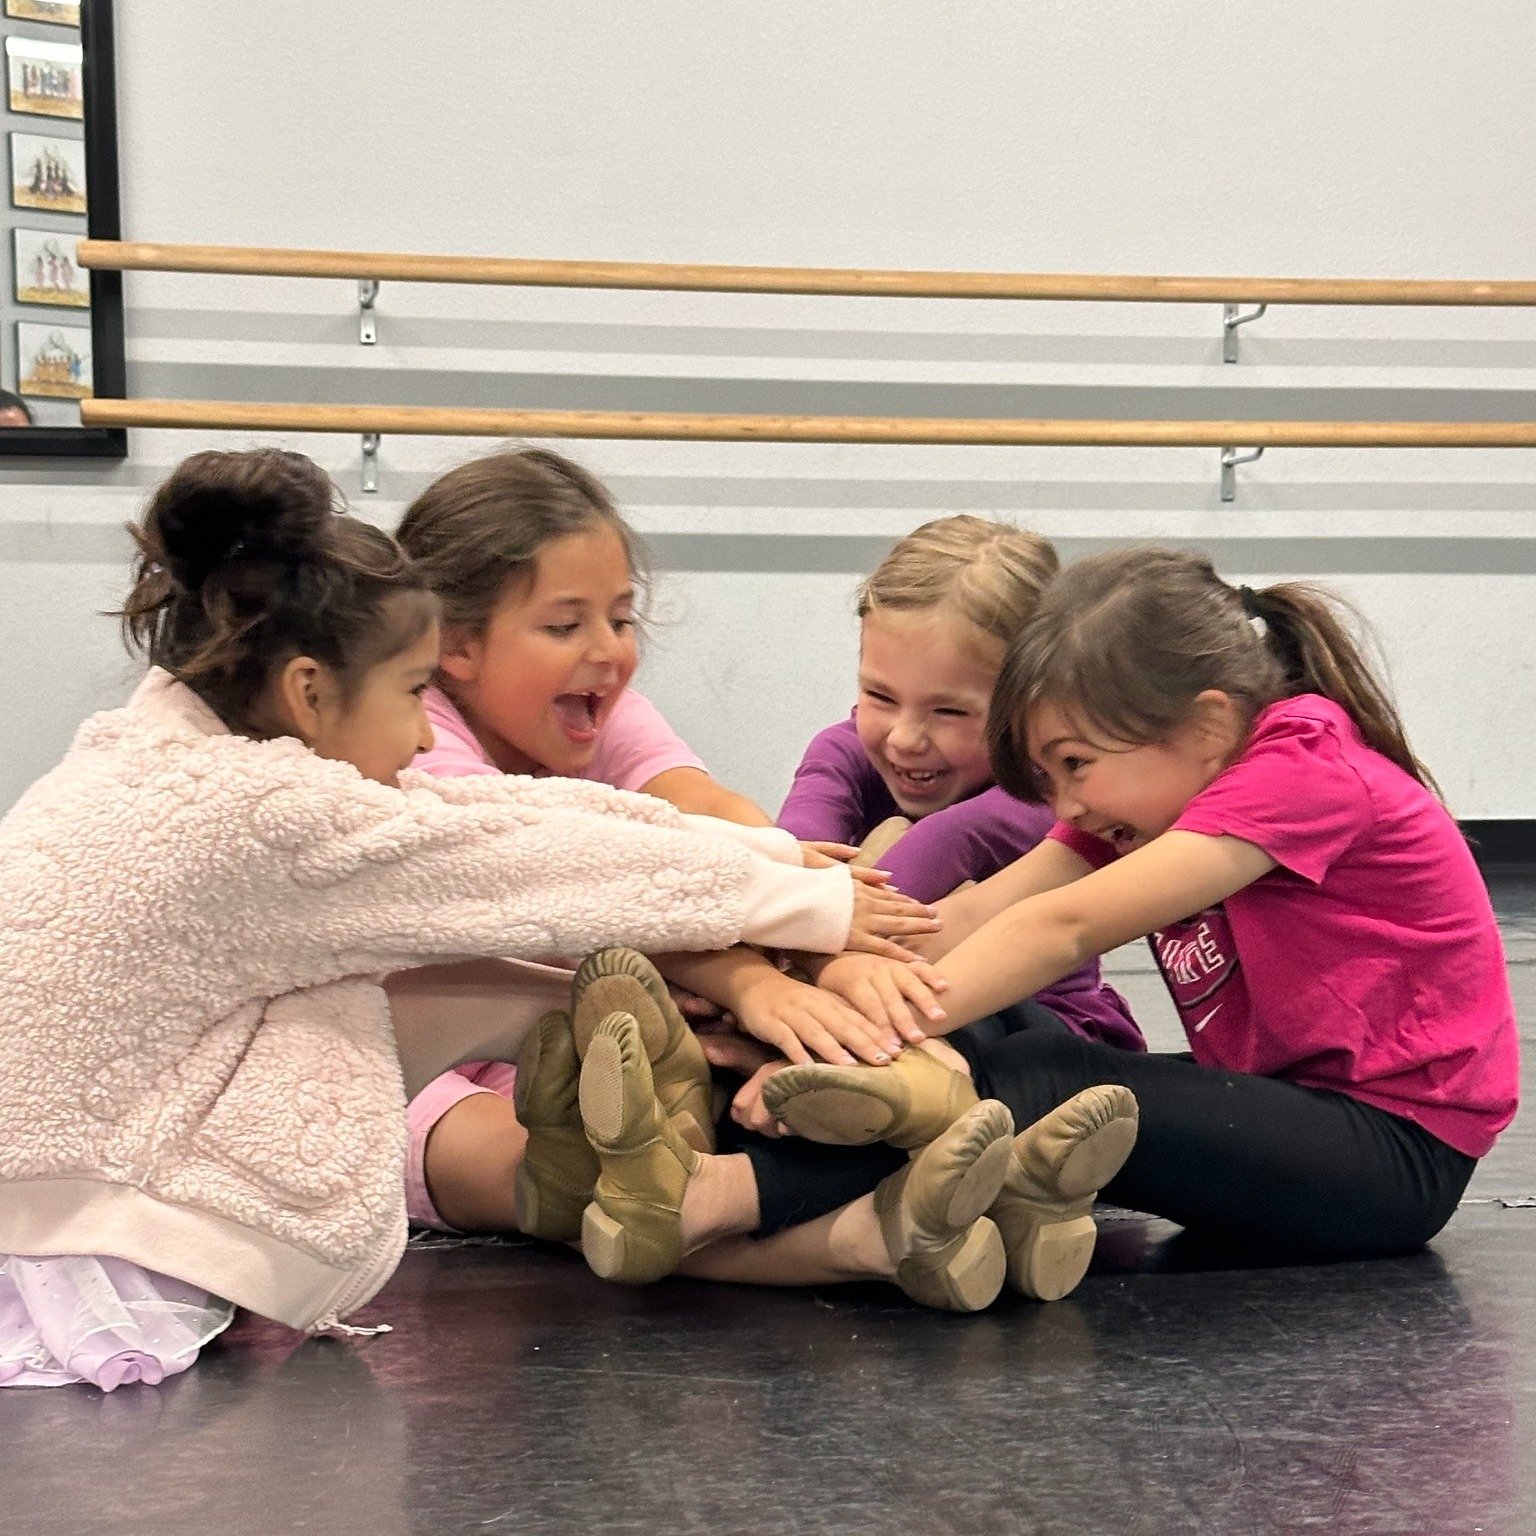 As a Dance family, we're not just moving to music; we're creating moments of pure happiness that ripple through our community.

🤩 From the littlest twirlers to seasoned performers, each step is infused with passion and purpose.

Here, in our vibrant